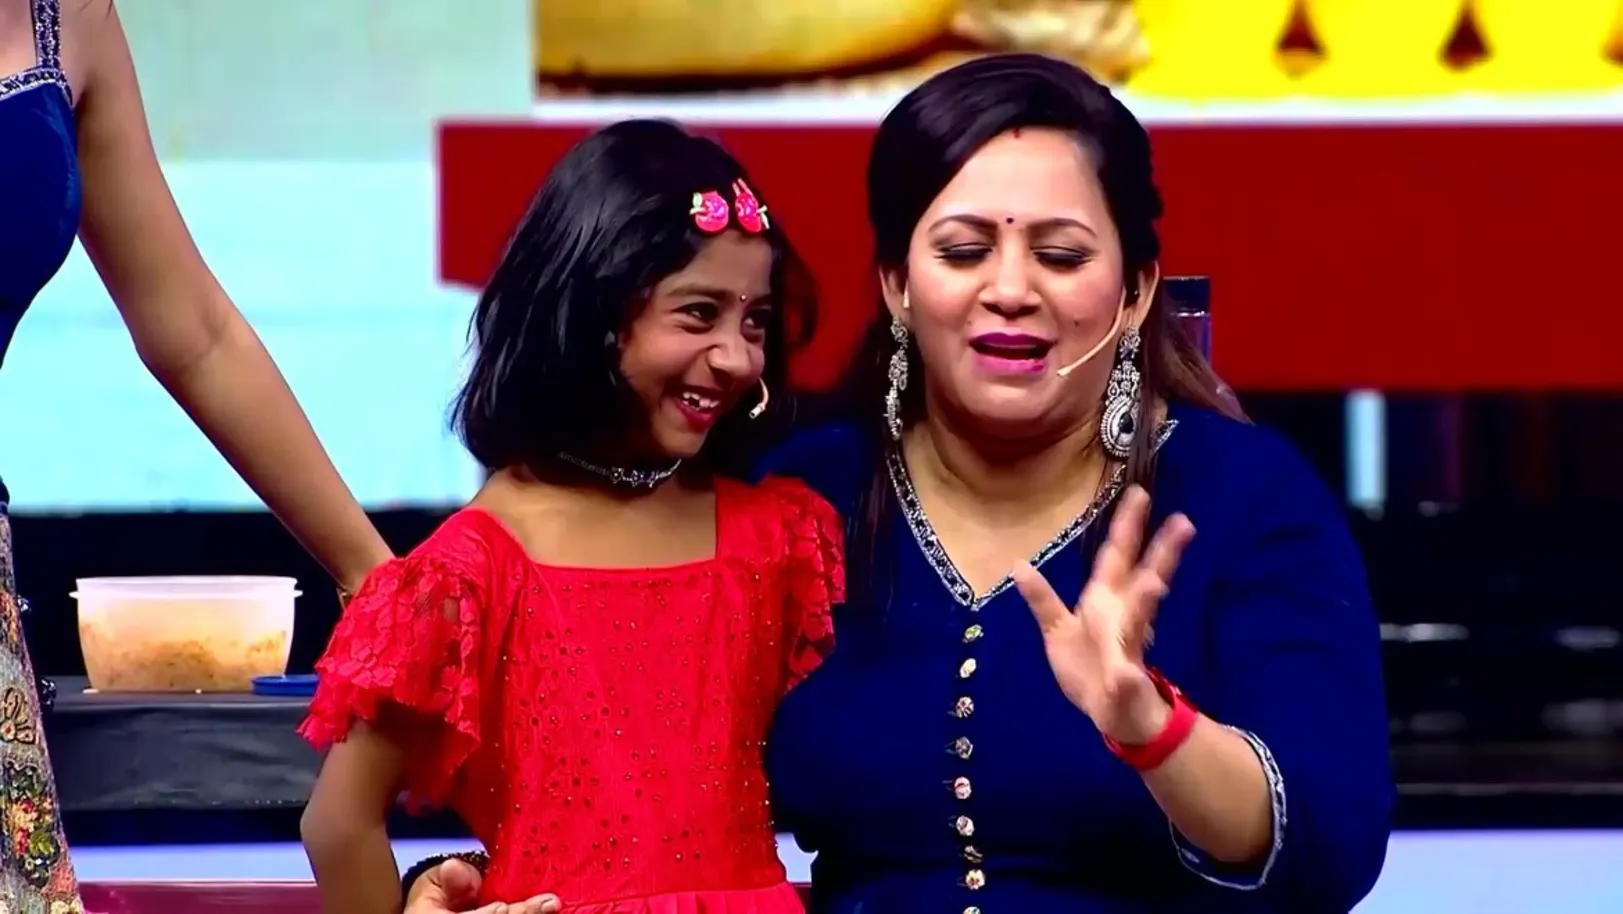 A Contestant wins the Mom's Kitchen Round | Suoer Moms S3 